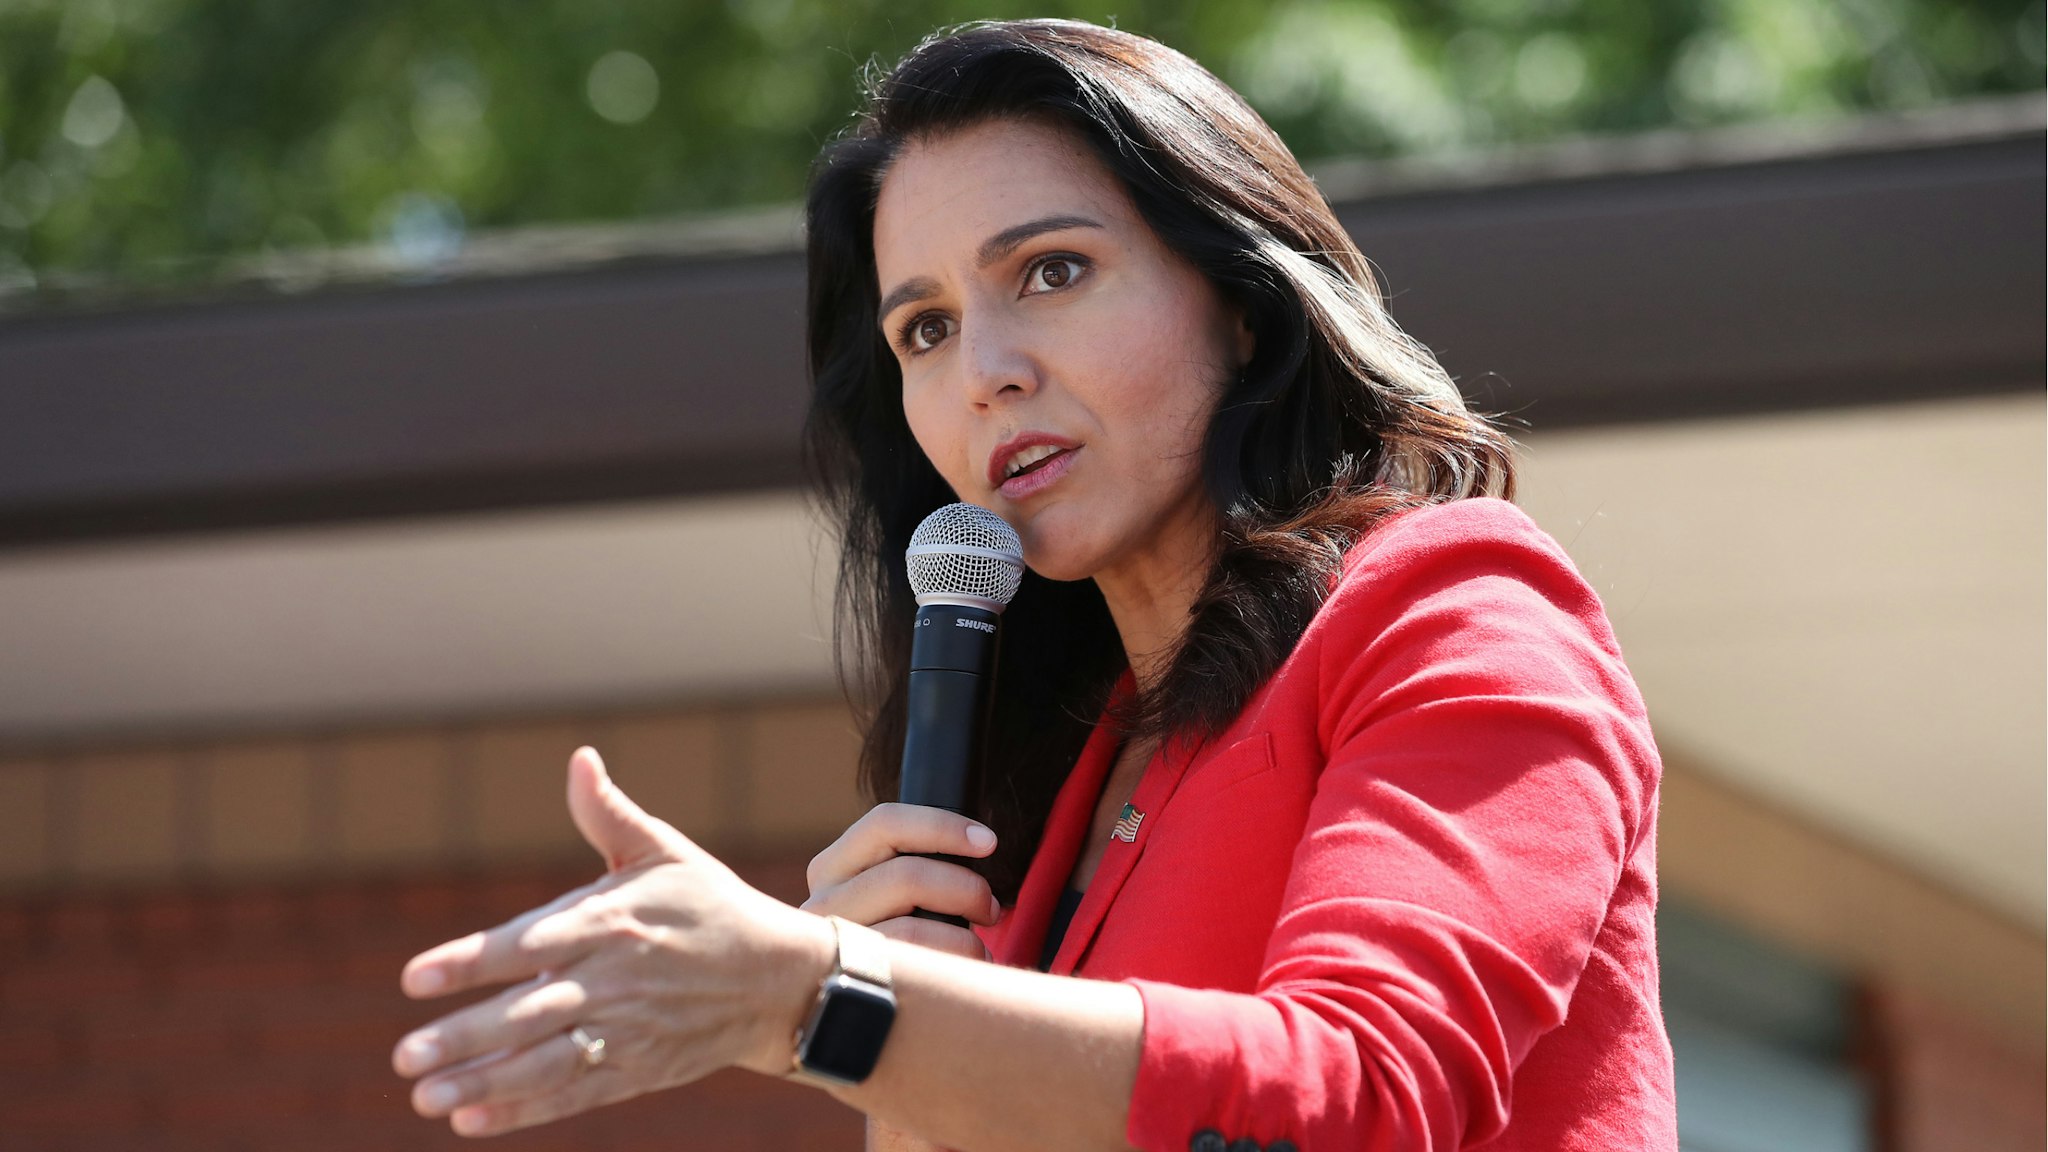 Democratic presidential candidate Rep. Tulsi Gabbard (D-HI) delivers a 20-minute campaign speech at the Des Moines Register Political Soapbox during the Iowa State Fair August 09, 2019 in Des Moines, Iowa.